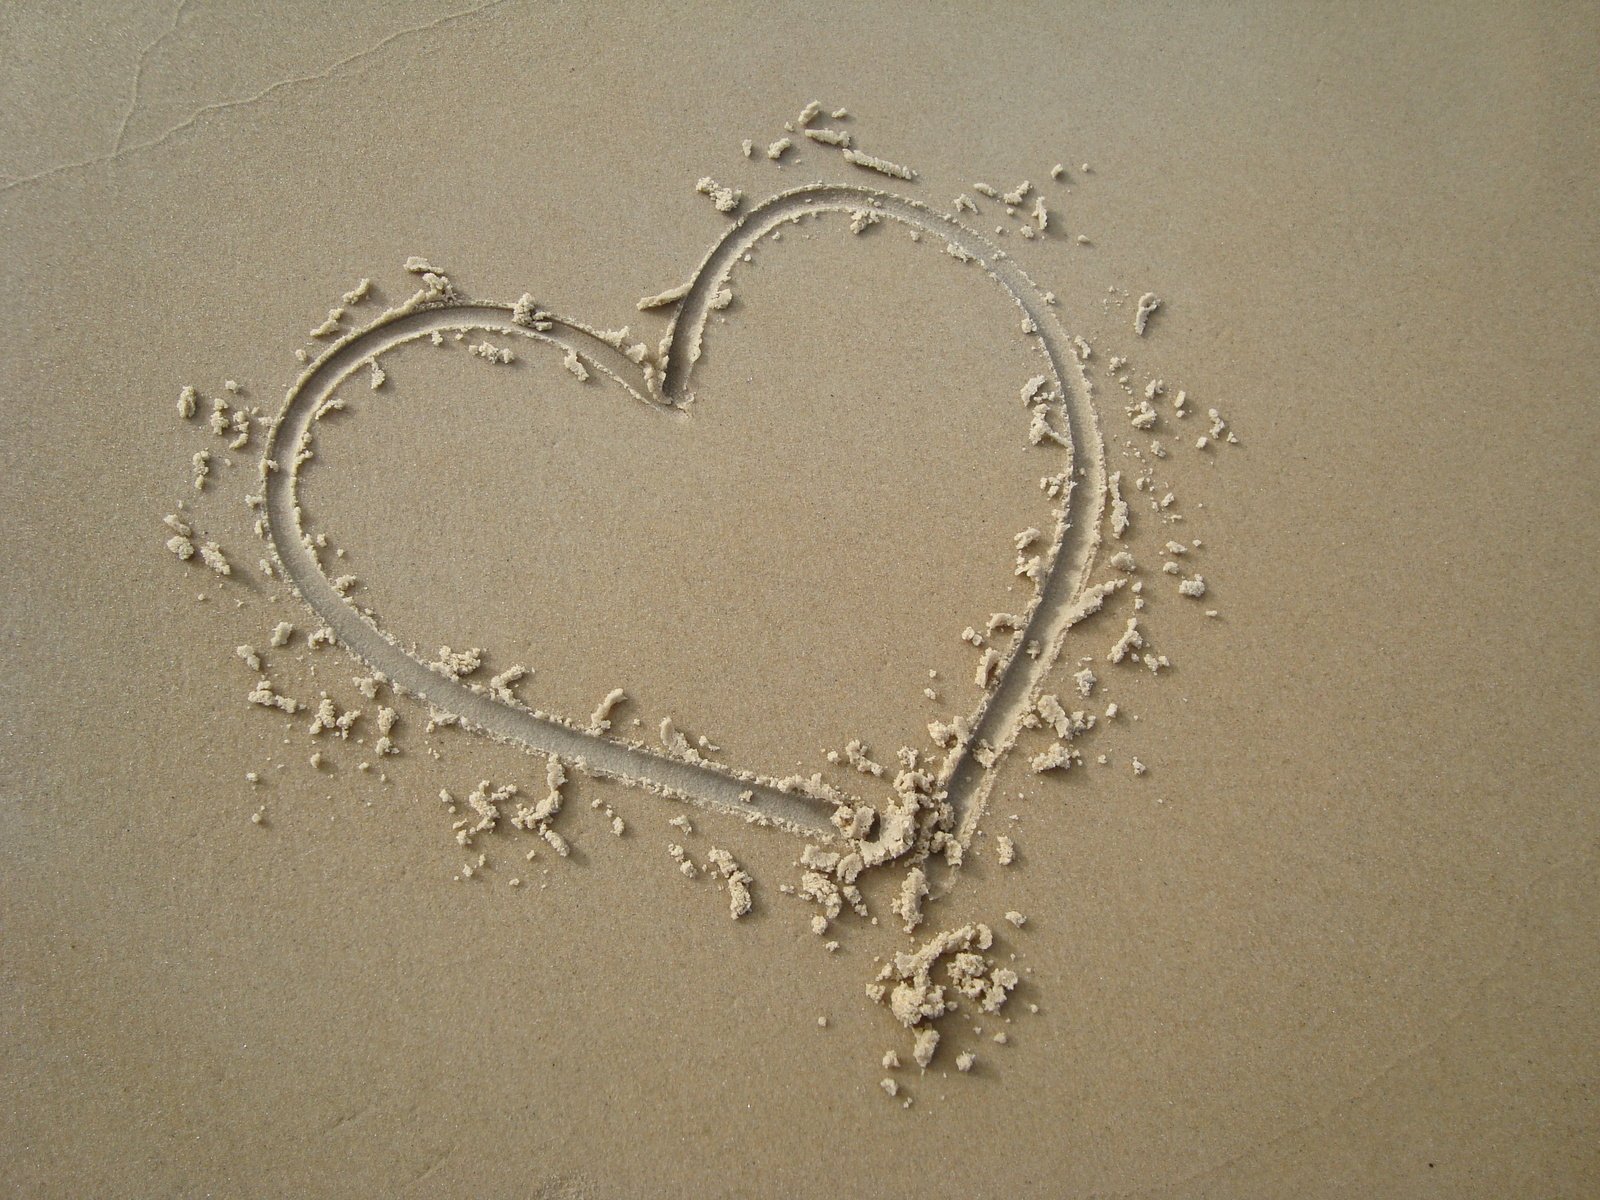 a heart drawn in the sand with birds at the beach